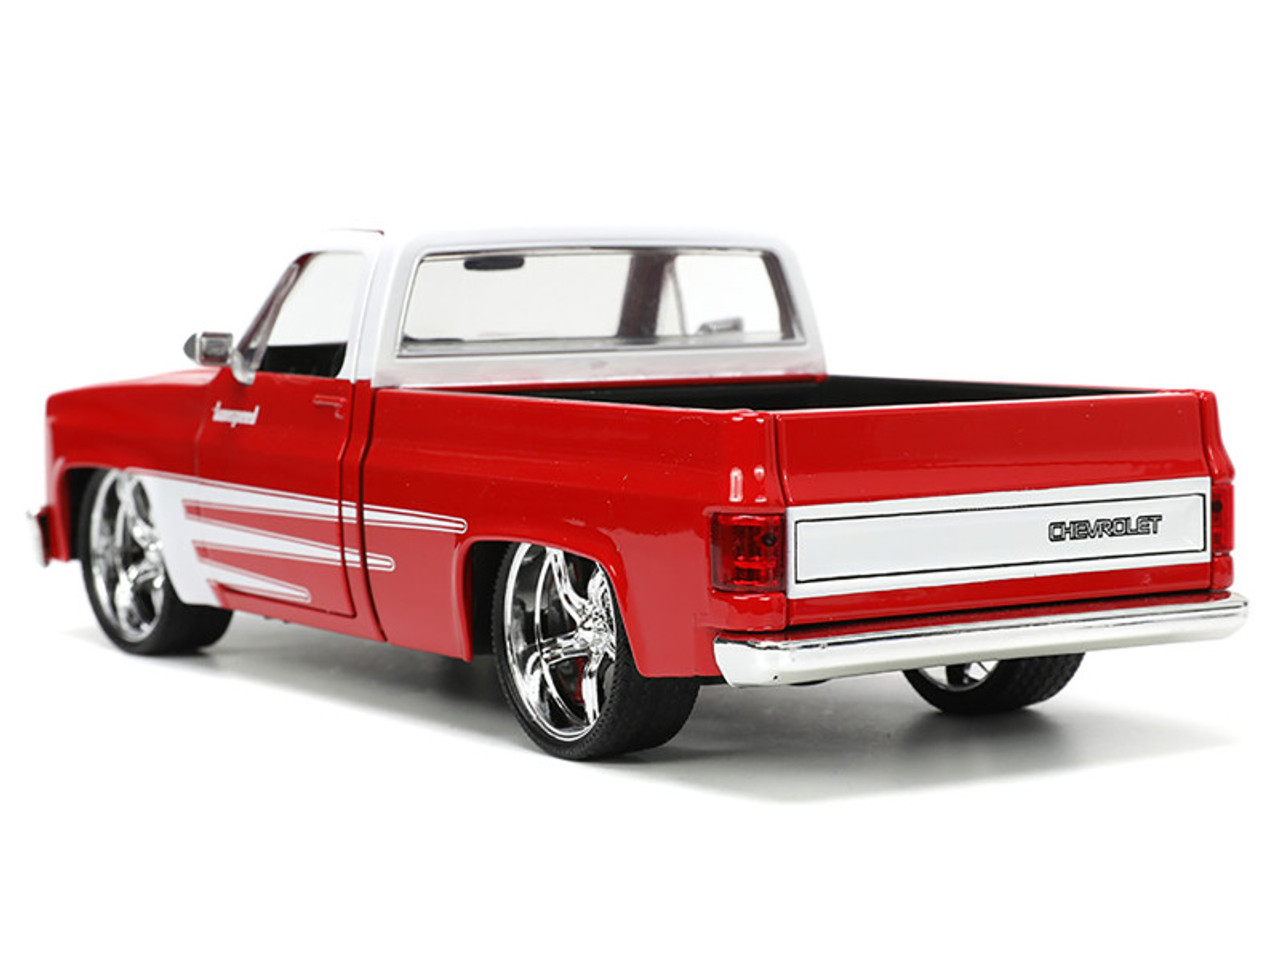 1985 Chevrolet C-10 Pickup Truck Red with White Top and Graphics with Extra Wheels "Just Trucks" Series 1/24 Diecast Model Car by Jada